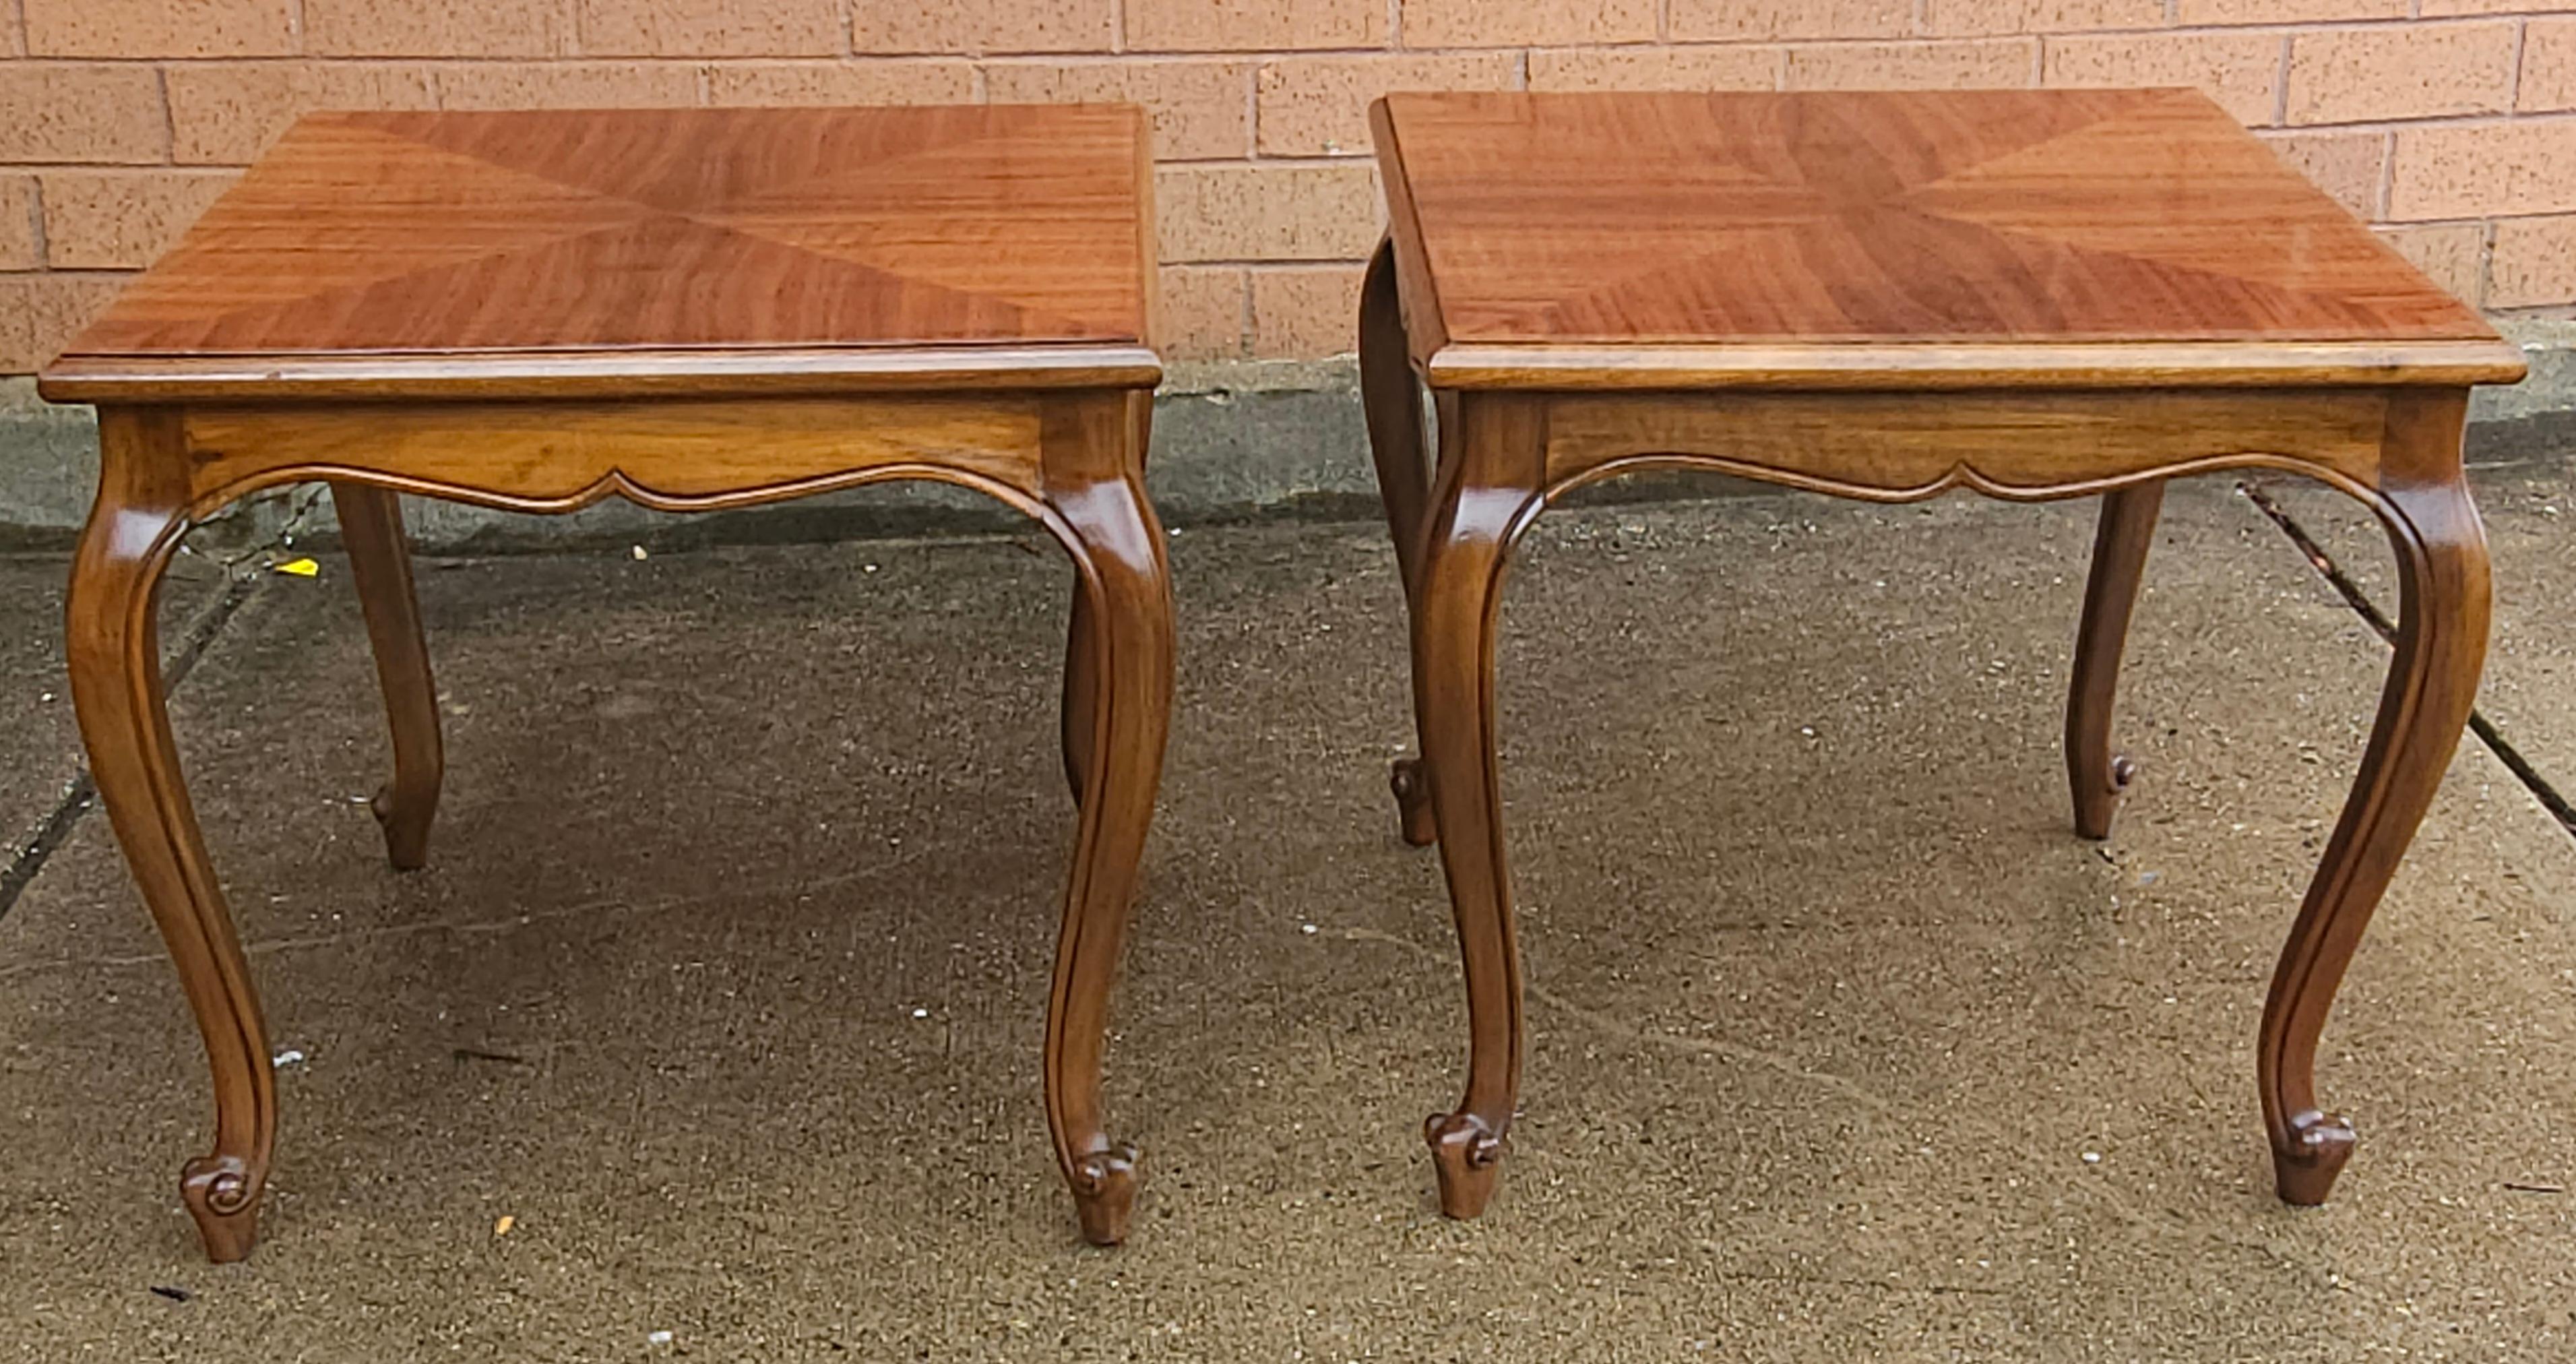 20th C. Handcrafted Bookmatched Brazilian Rosewood Provincial Side Tables, Pair For Sale 1